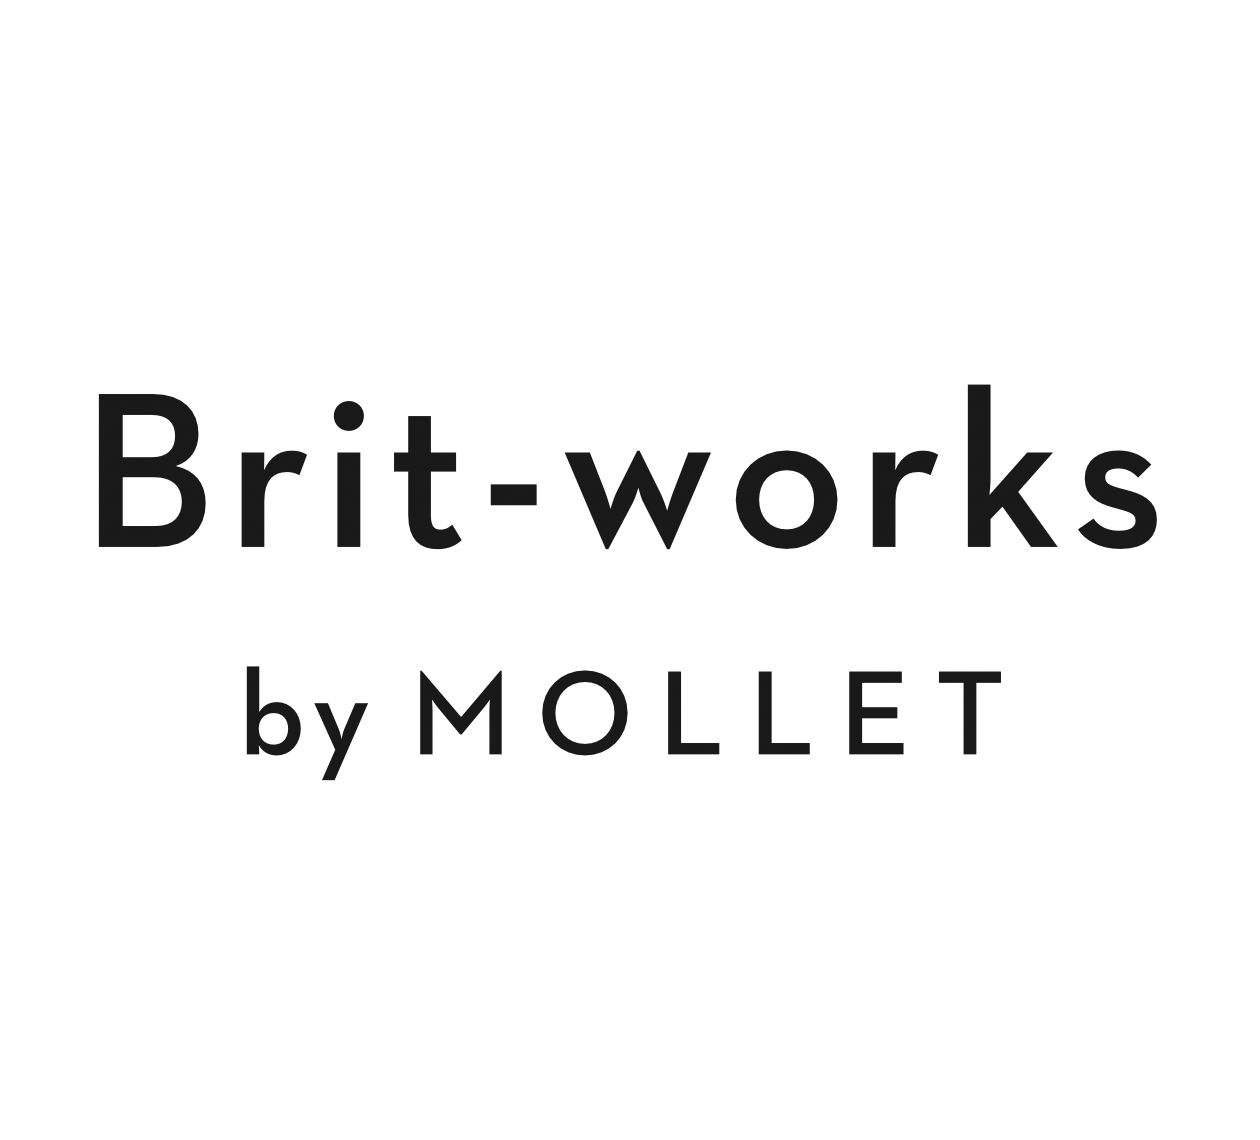 Brit-works by MOLLET